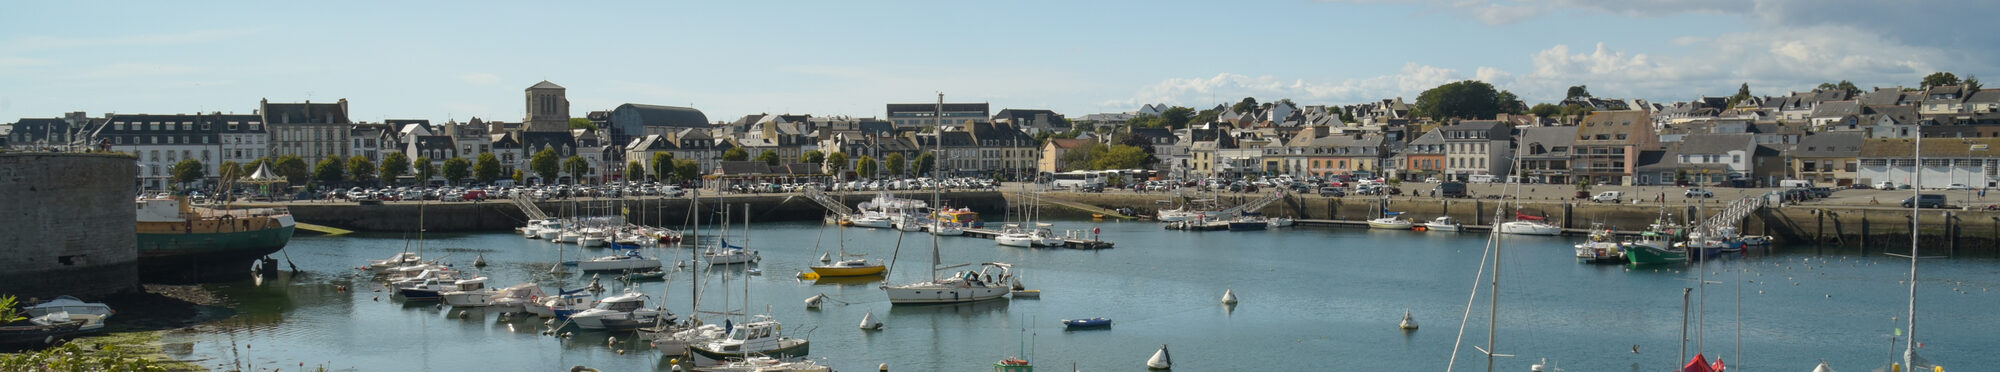 Landscape on the city of Concarneau in Finistere in Brittany